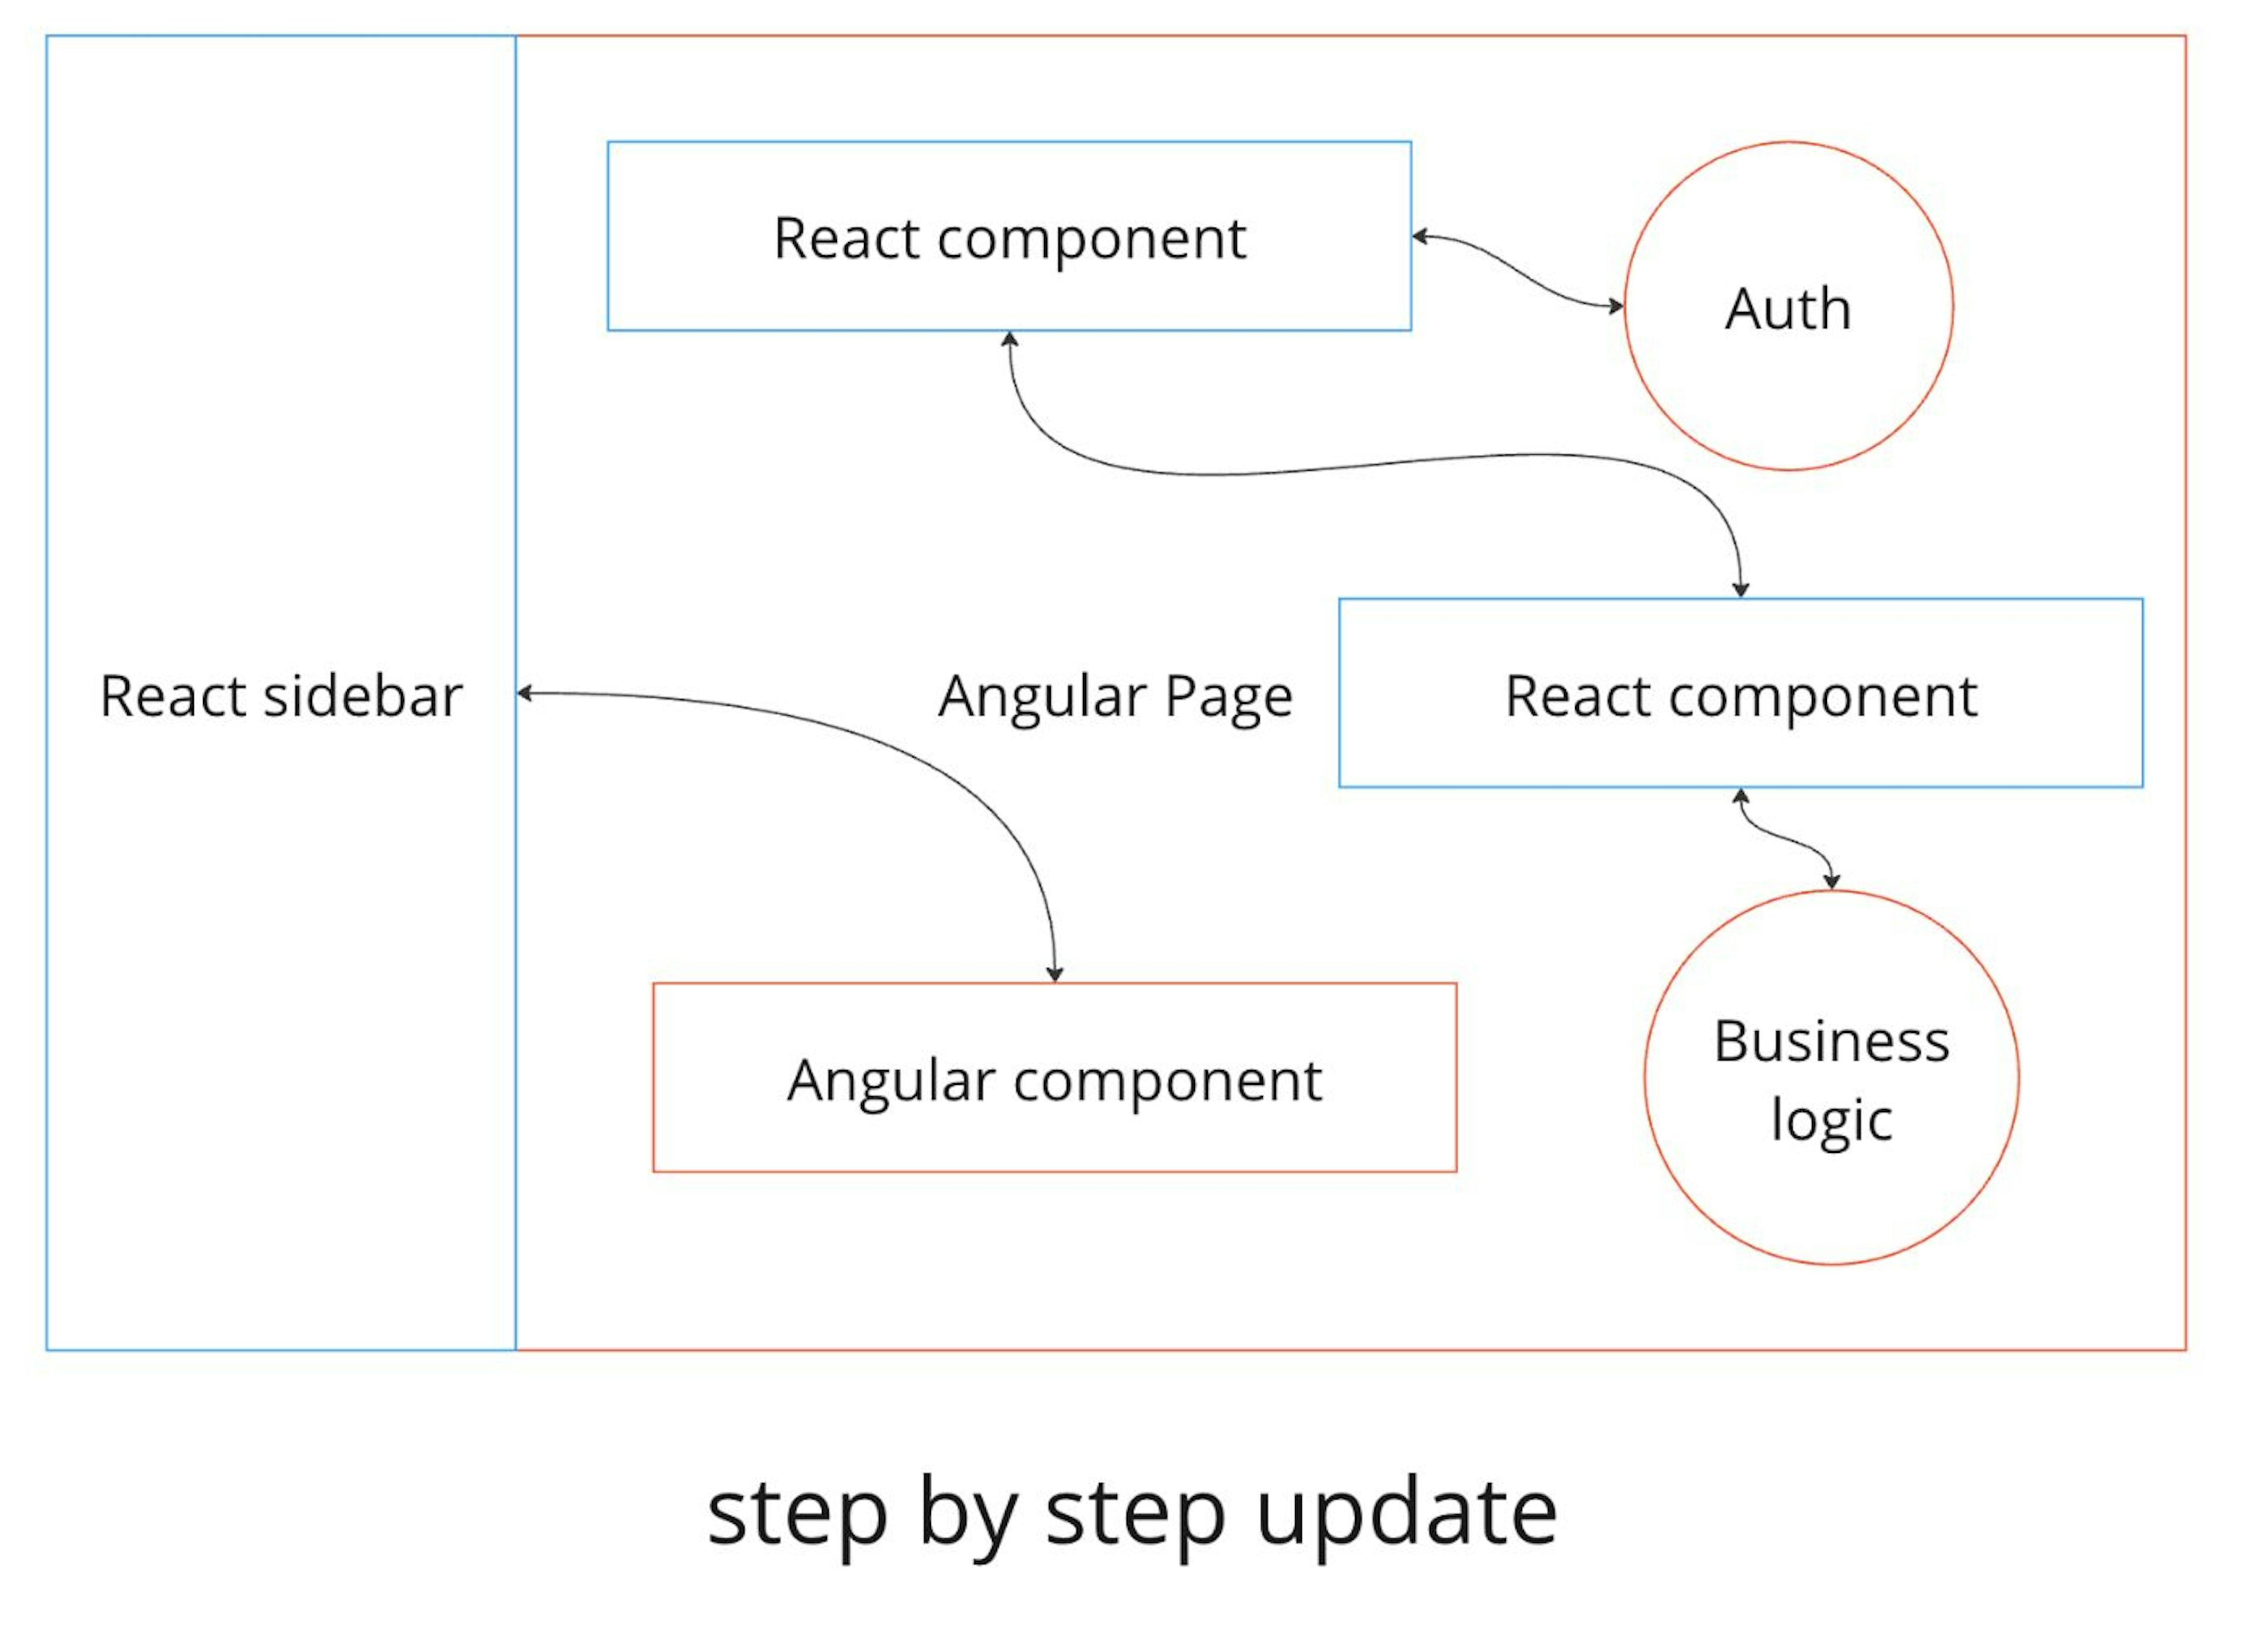 Seamless interaction between React and AngularJS components